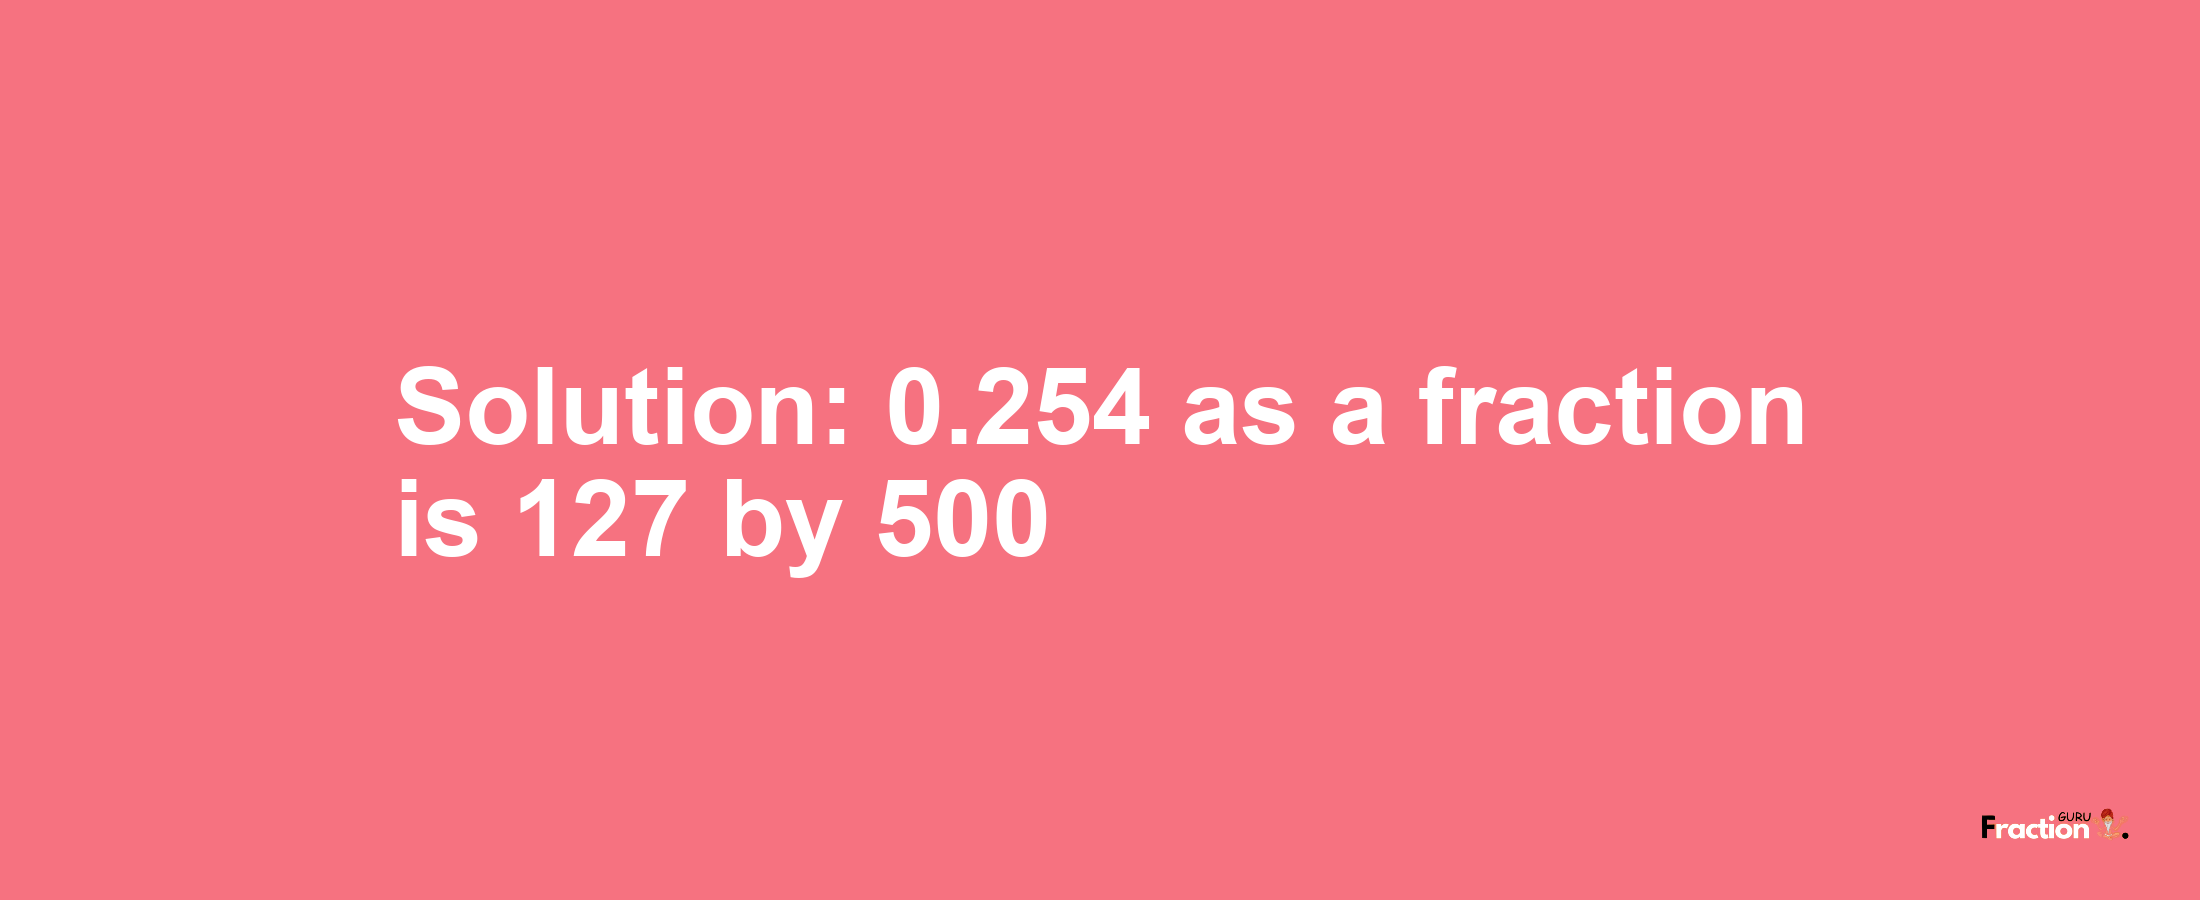 Solution:0.254 as a fraction is 127/500